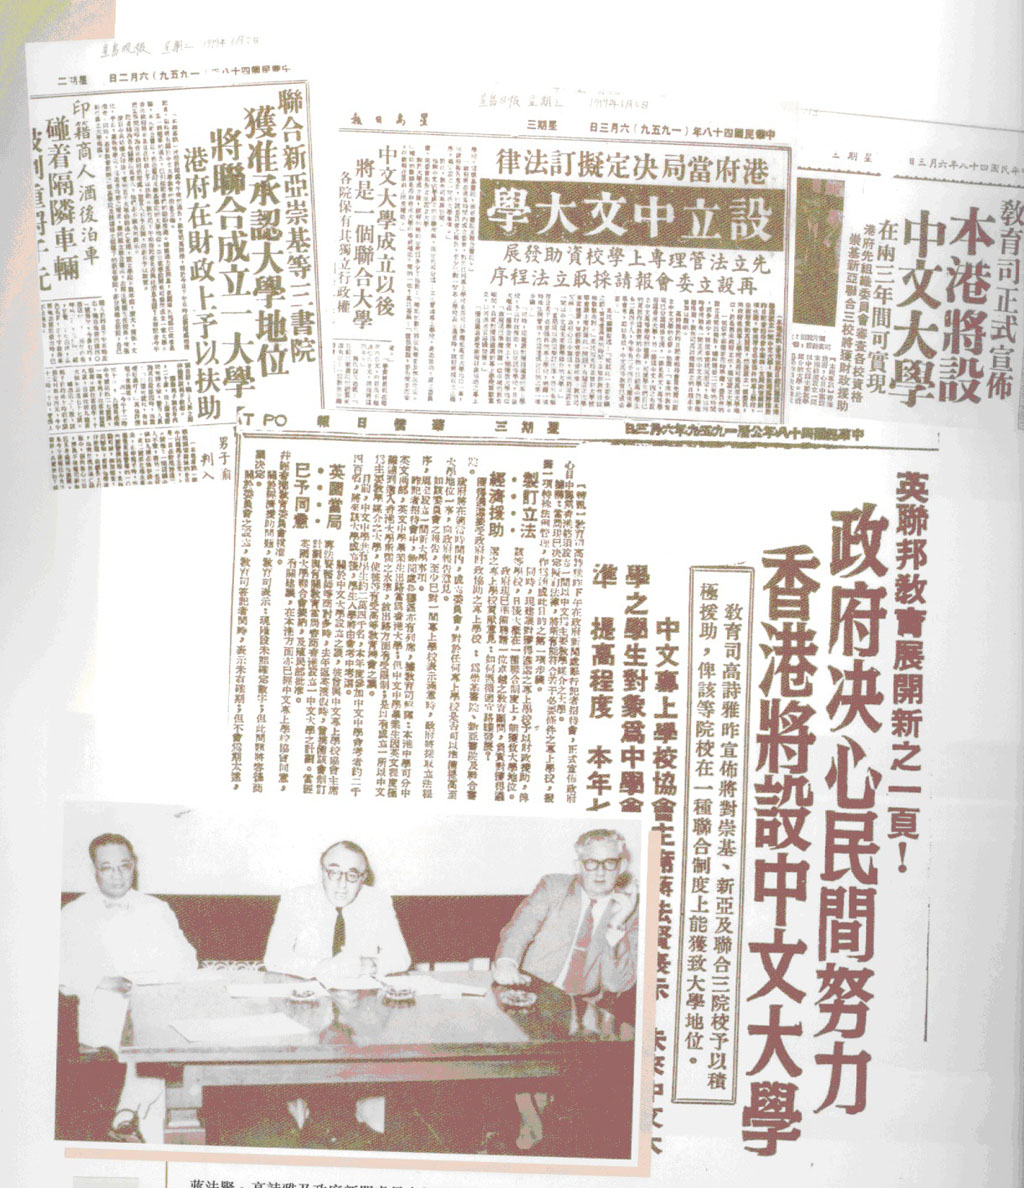 A newspaper clipping on the amalgamation to form the University (1959)